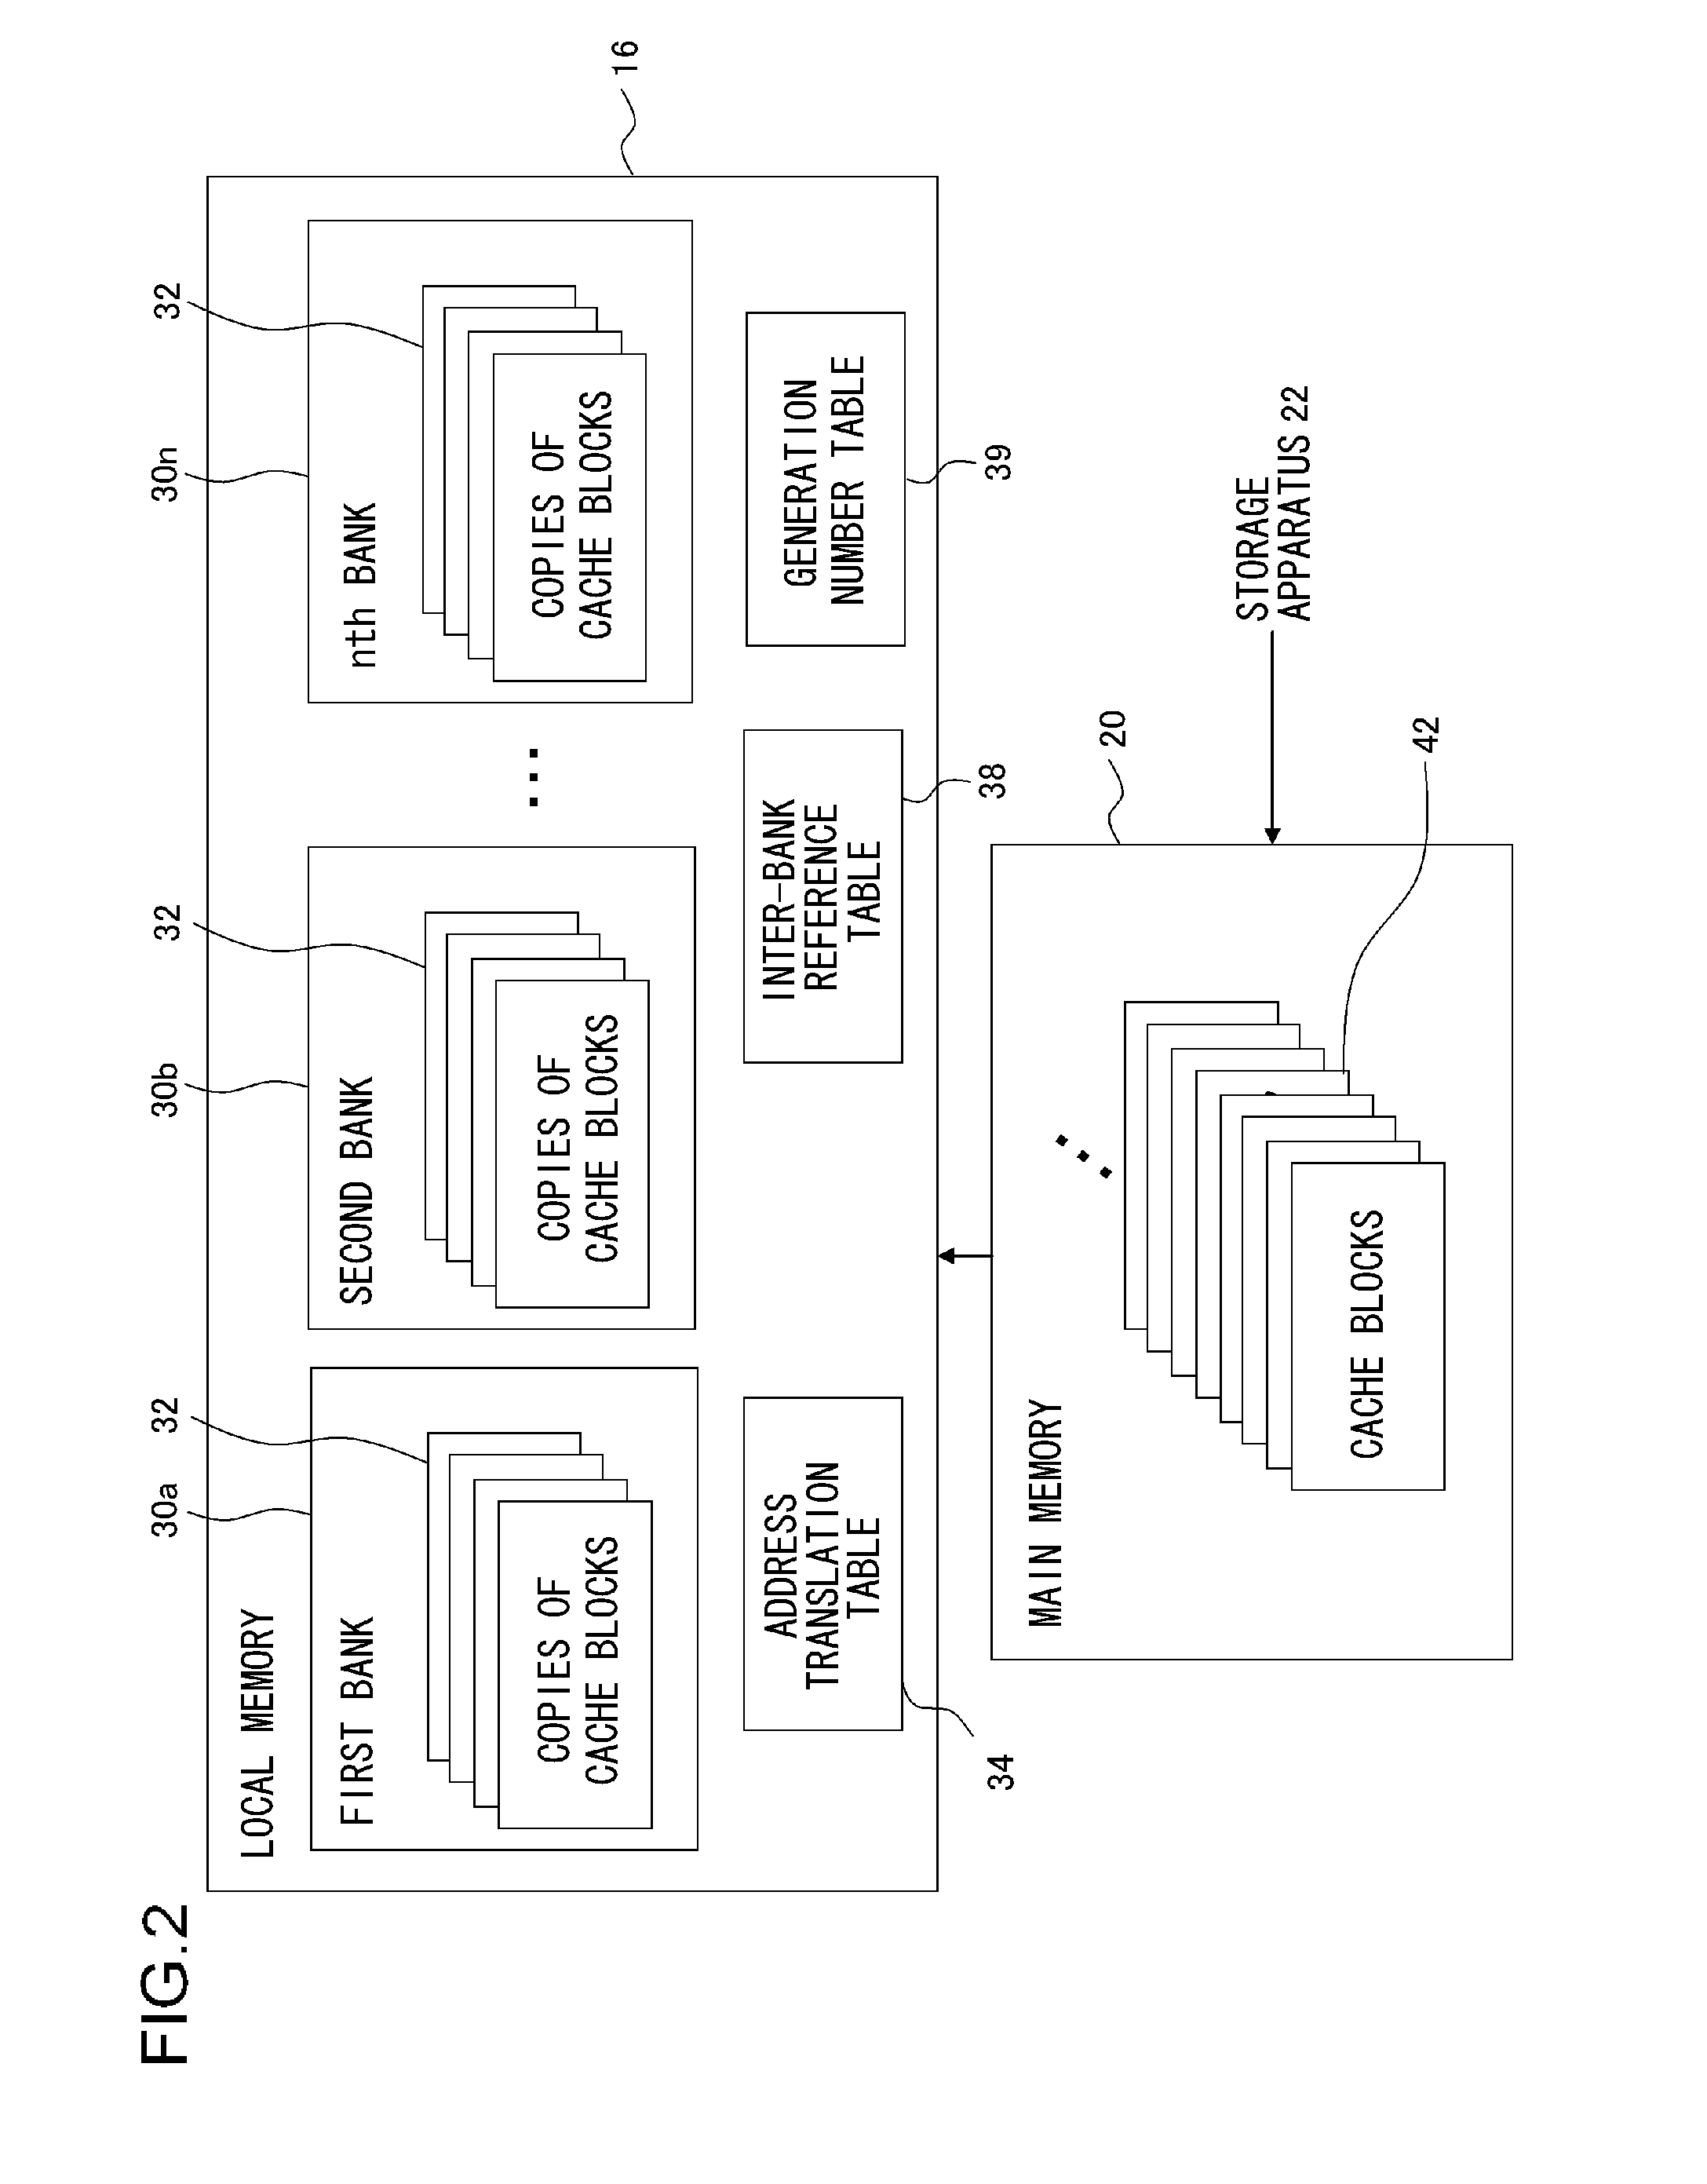 Apparatus and method for information processing enabling fast access to program